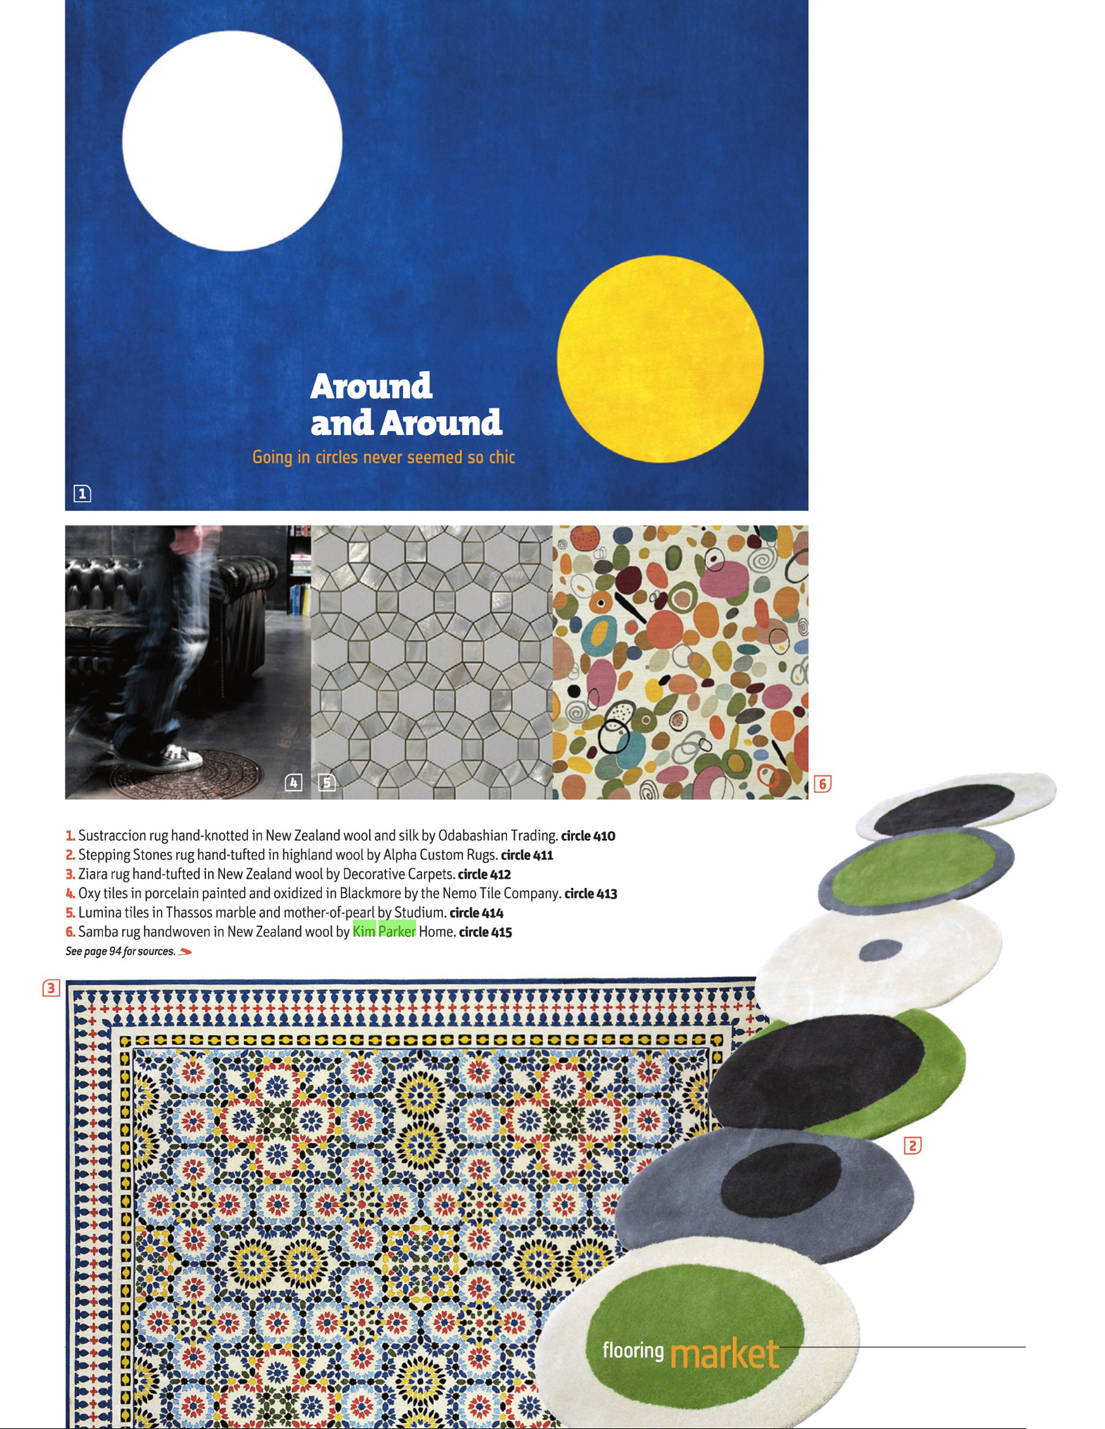 "Samba" designer rug from the Kim Parker Home collection is featured in the July 2011 issue of Interior Design magazine.